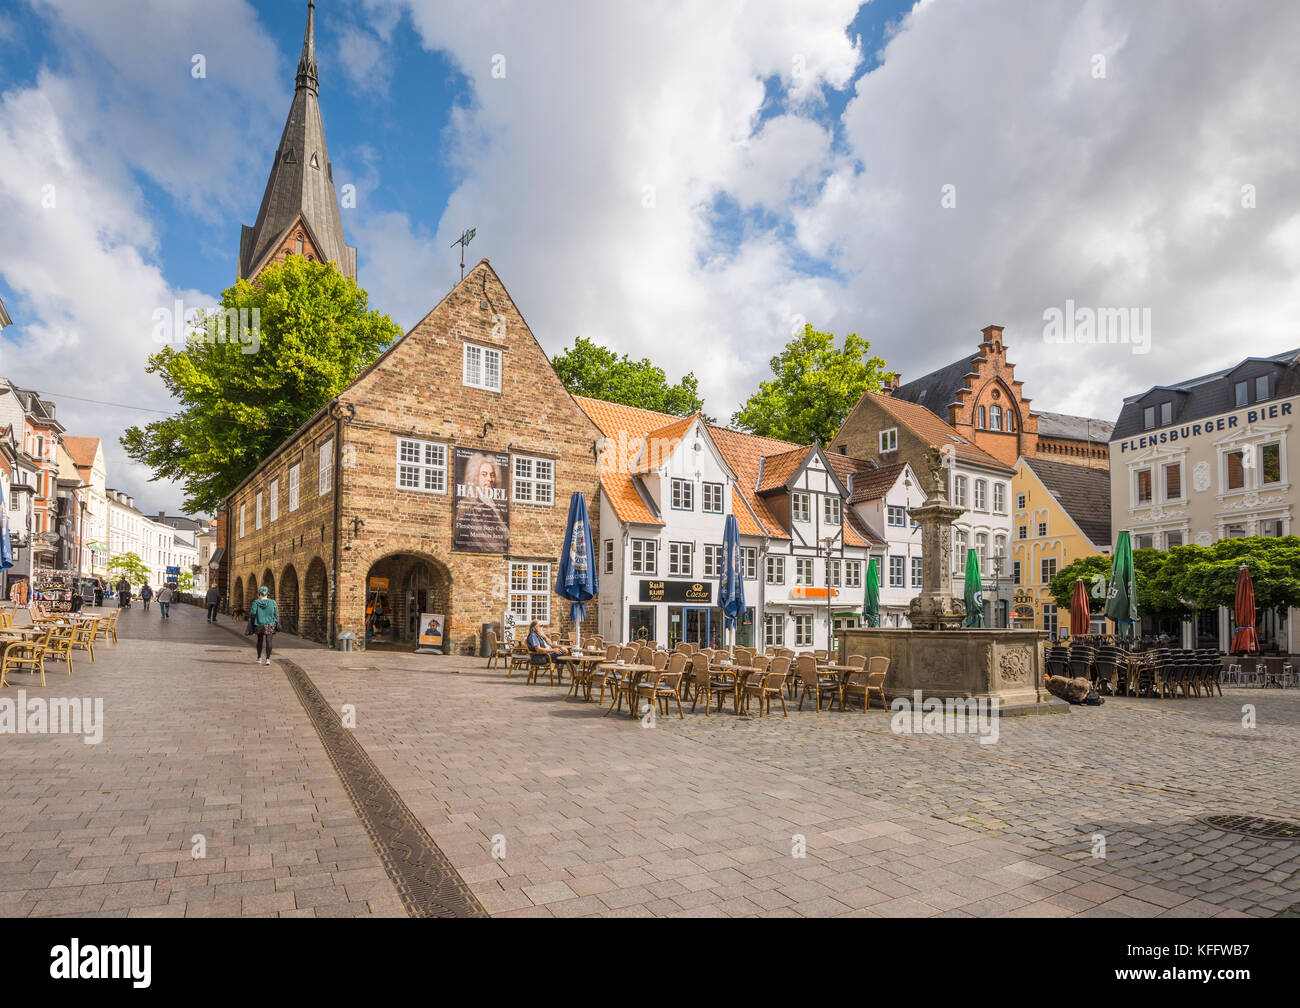 Nordermarkt square in the coastal town Flensburg at the Baltic Sea, Germany Stock Photo